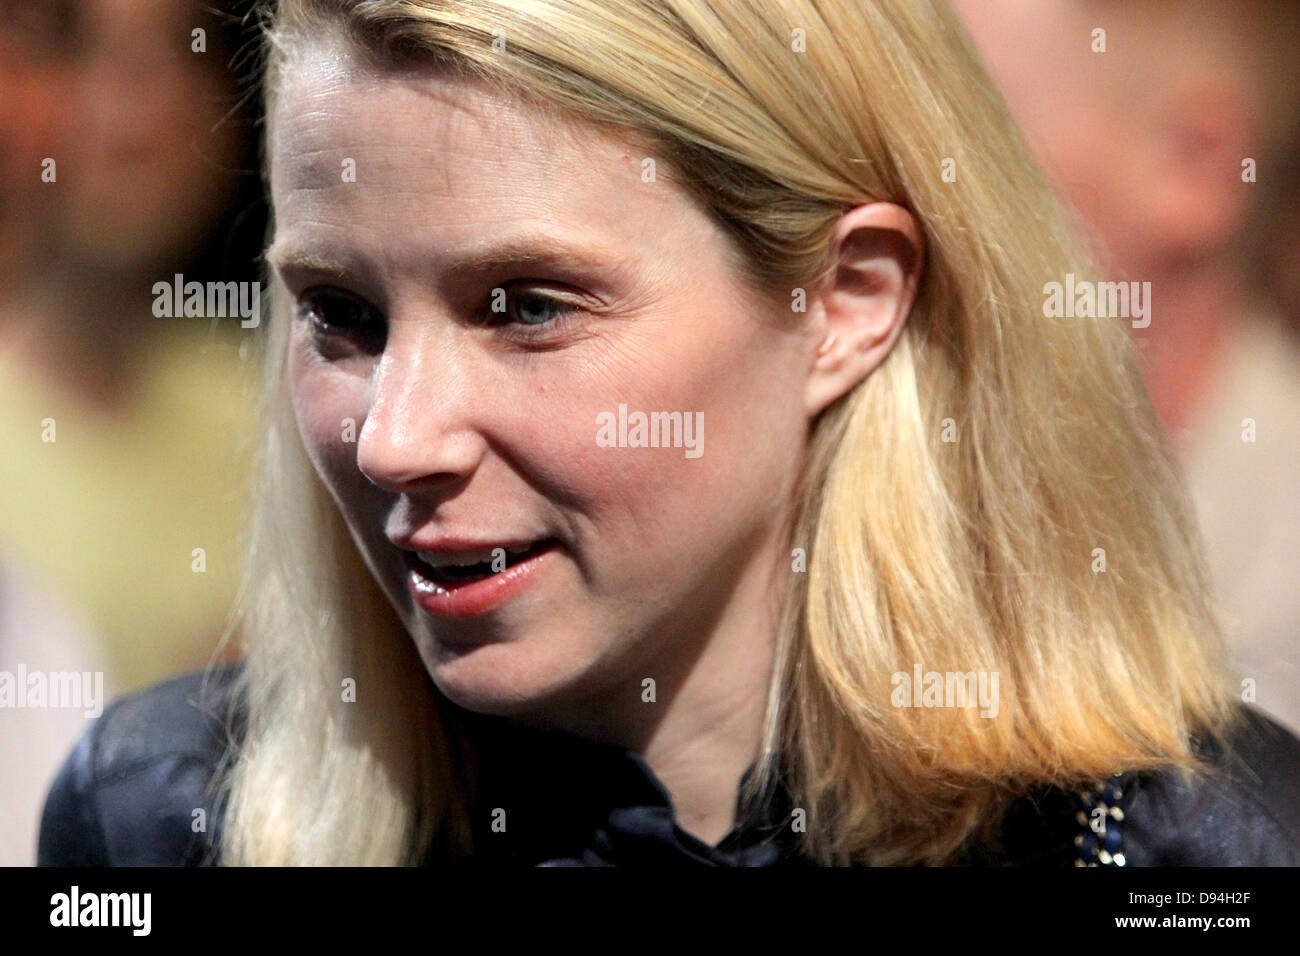 Yahoo President and CEO Marissa Mayer is pictured during the Apple World Wide Developers Conference in San Francisco, California, USA 10, June 2013. Apple unveiled new software for its computers, smartphones and tablets Monday at the World Wide Developers Conference. Photo: Christoph Dernbach/dpa Stock Photo